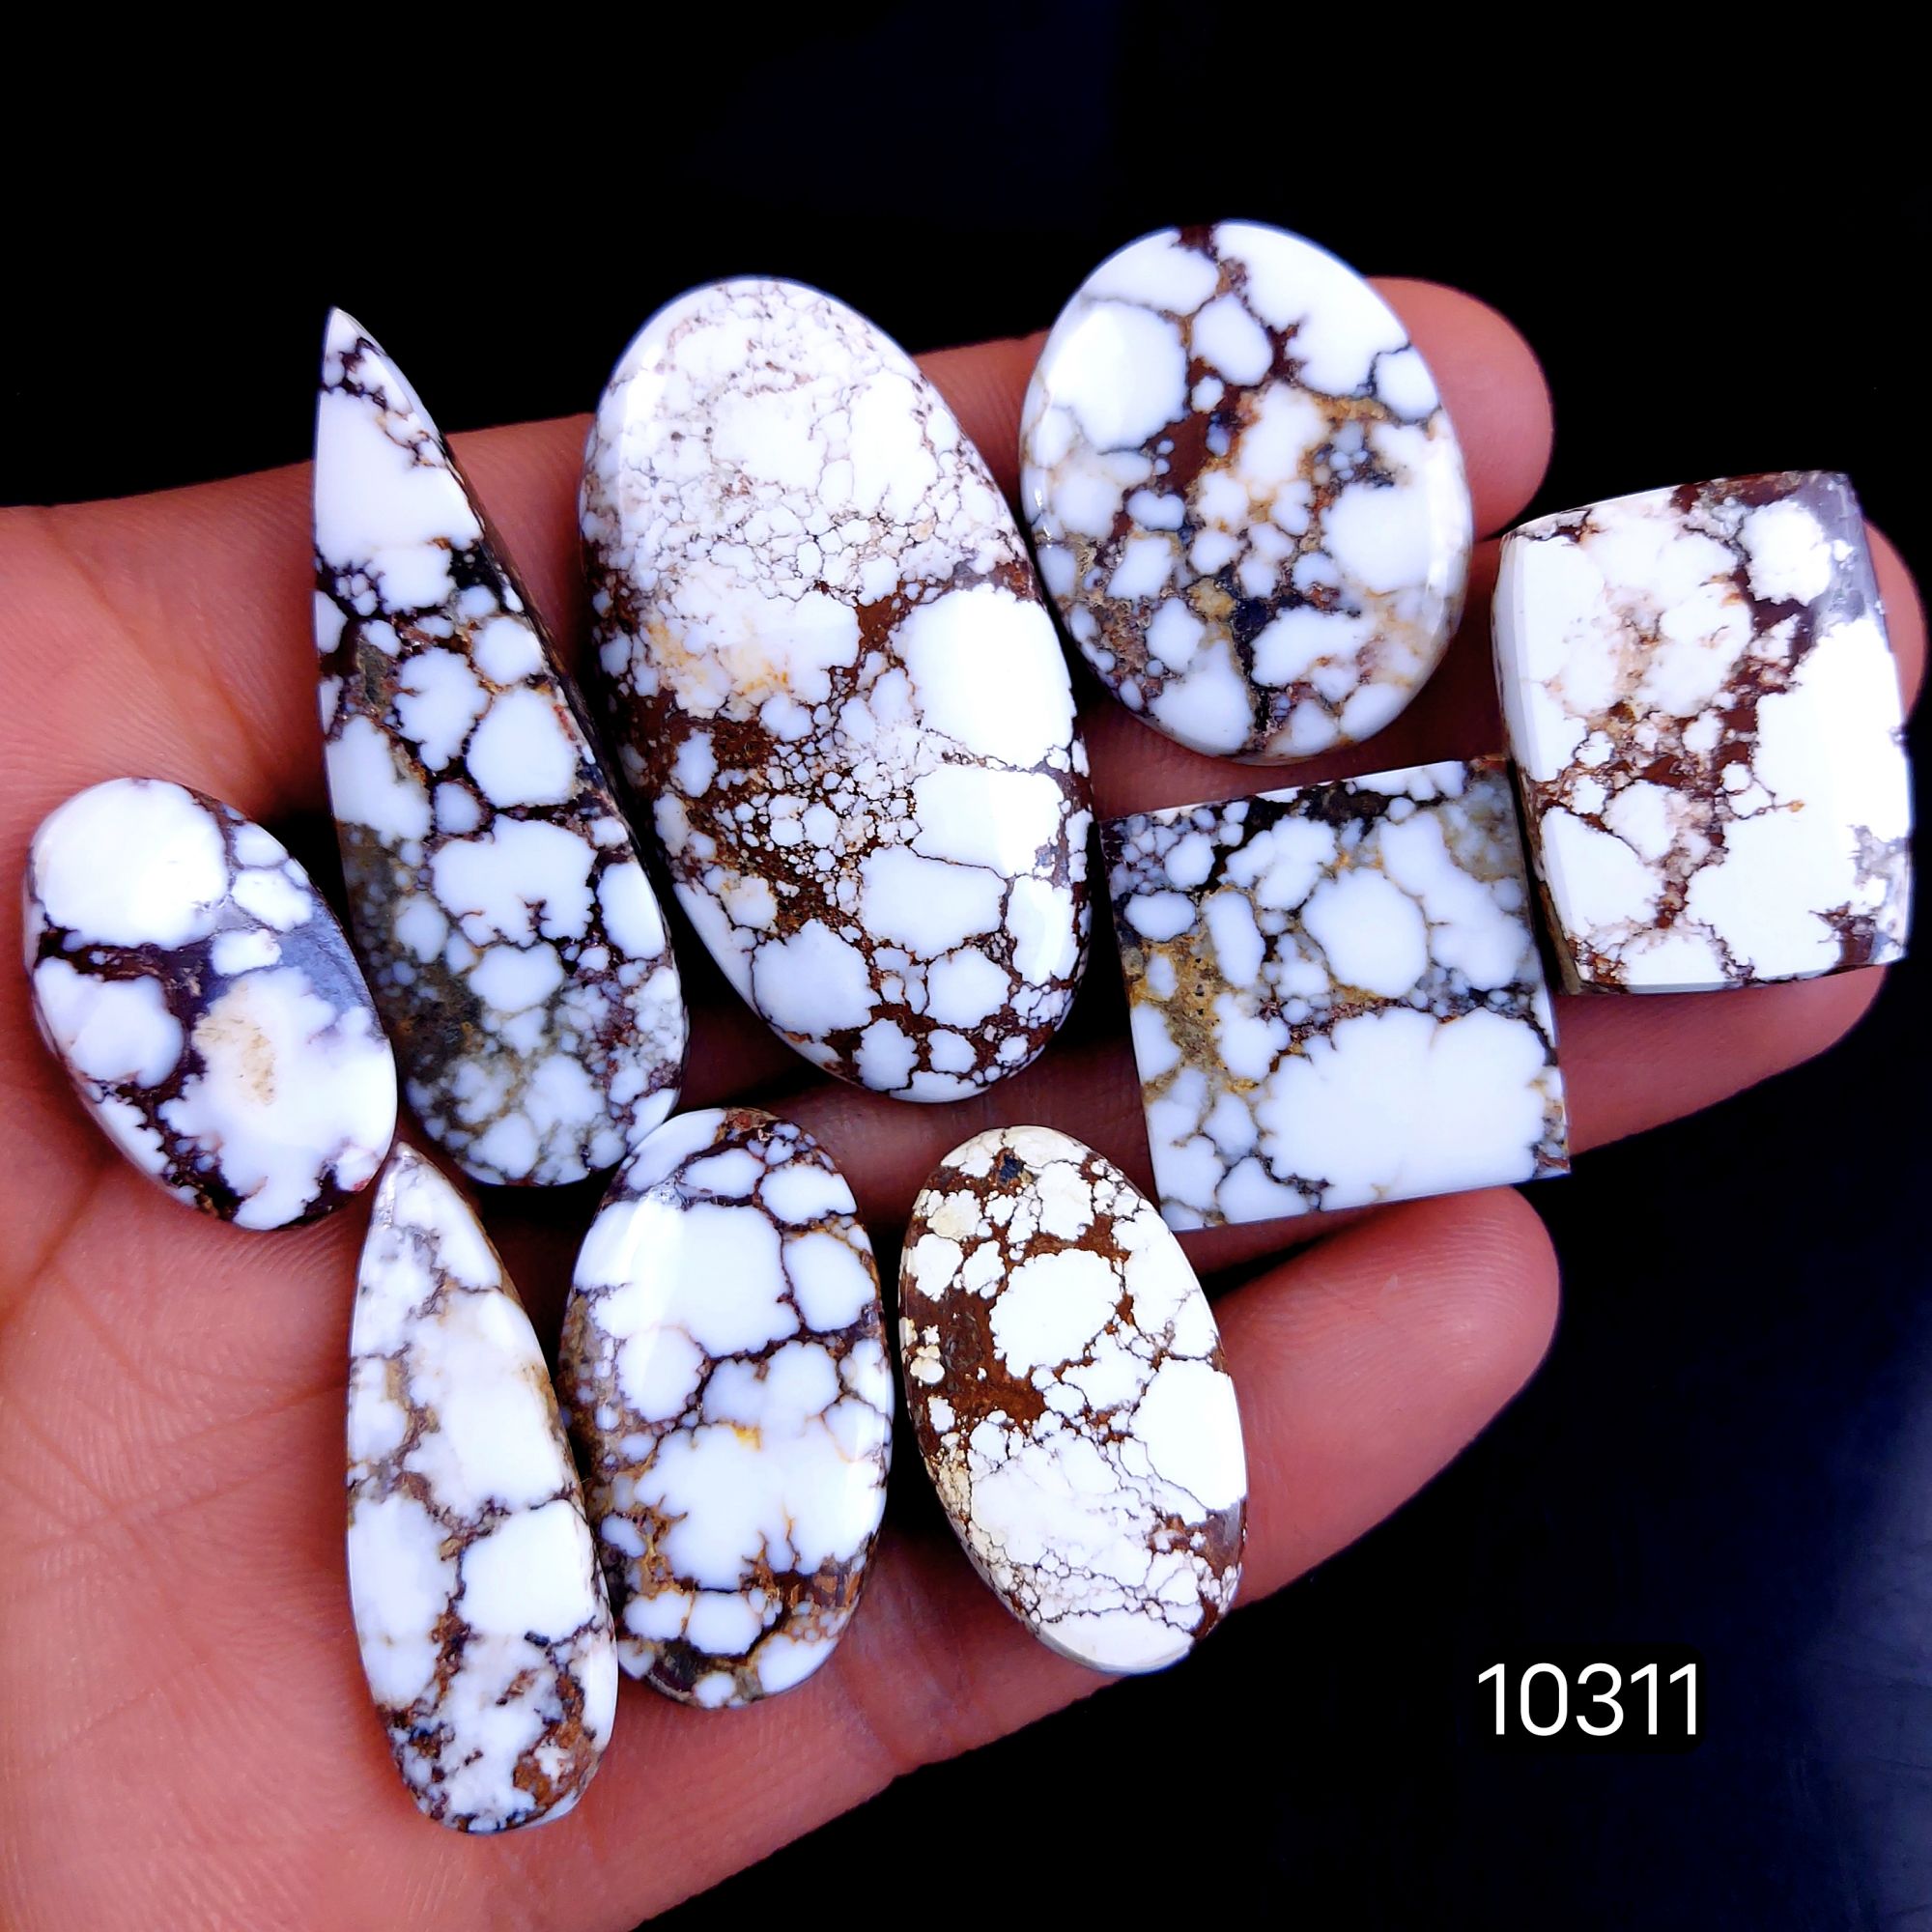 9Pc 271Cts Natural Wild Horse Magnesite Turquoise Cabochon Polished Loose Gemstone Flat Back Multi Jewelry Making Crystal  44x22 24x14mm #10311